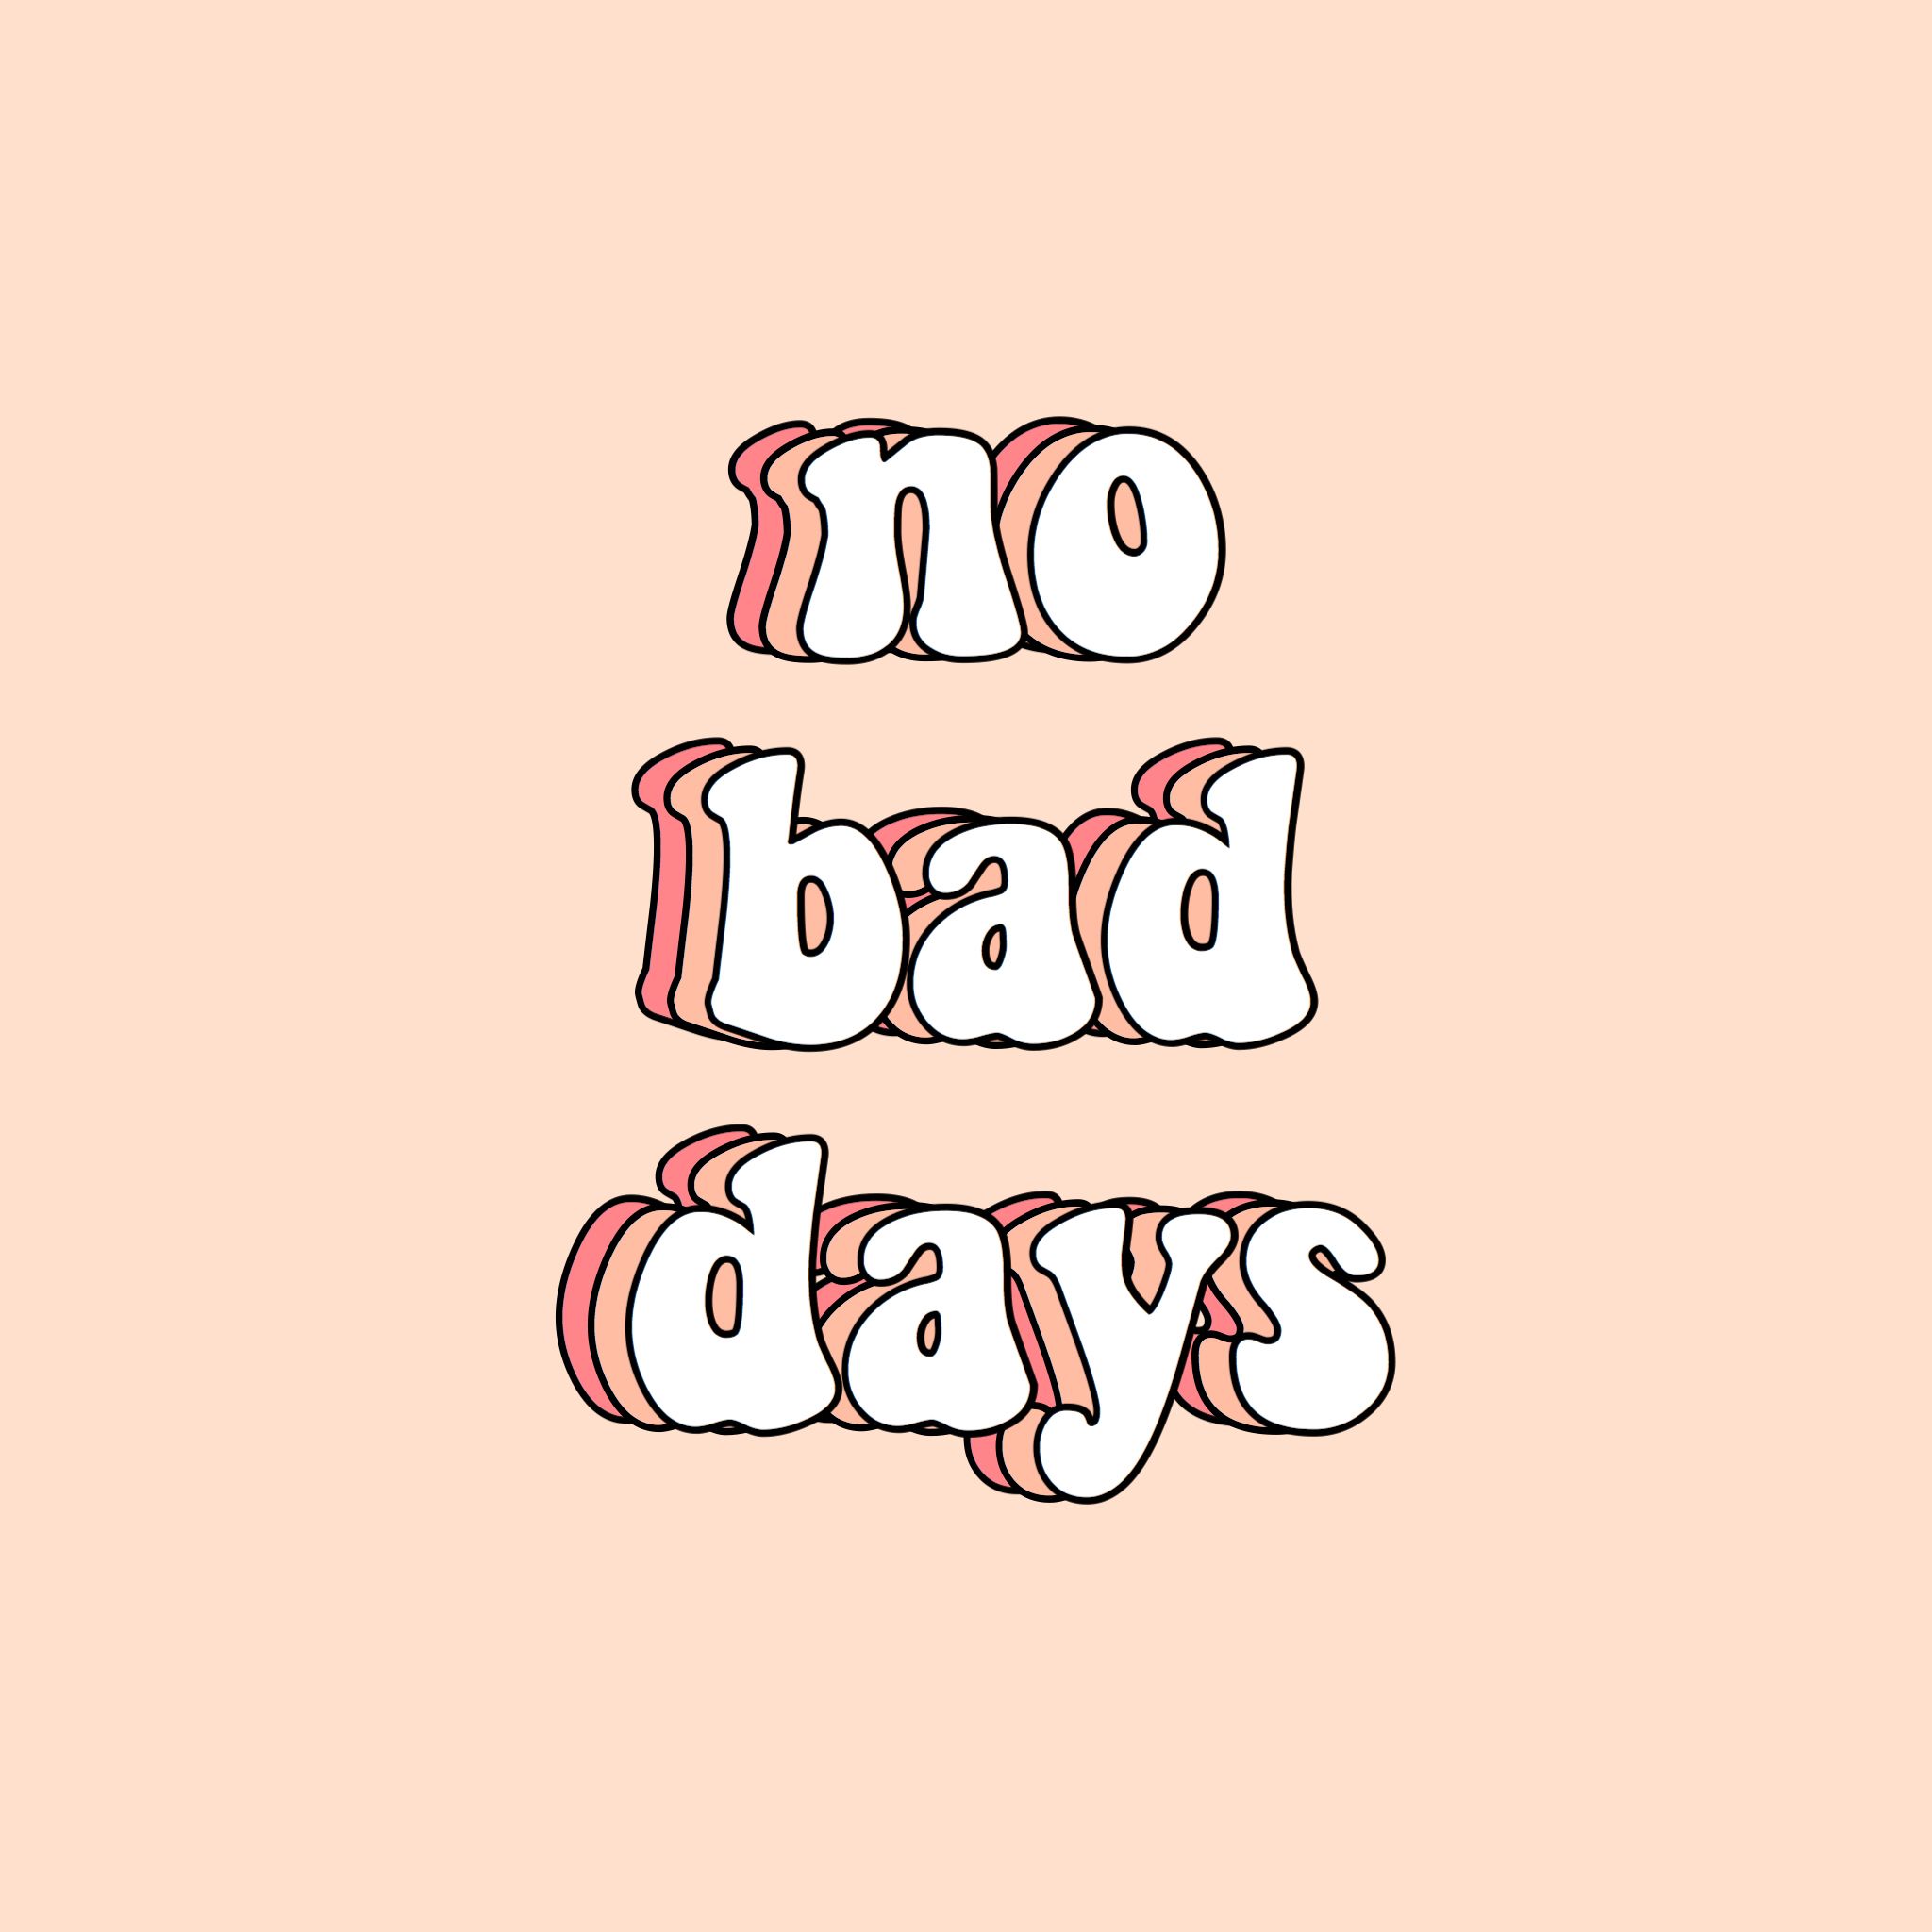 No Bad Days Wallpapers On Wallpaperdog Minimal wallpaper aesthetic desktop wallpaper aesthetic backgrounds hd wallpapers for laptop. no bad days wallpapers on wallpaperdog